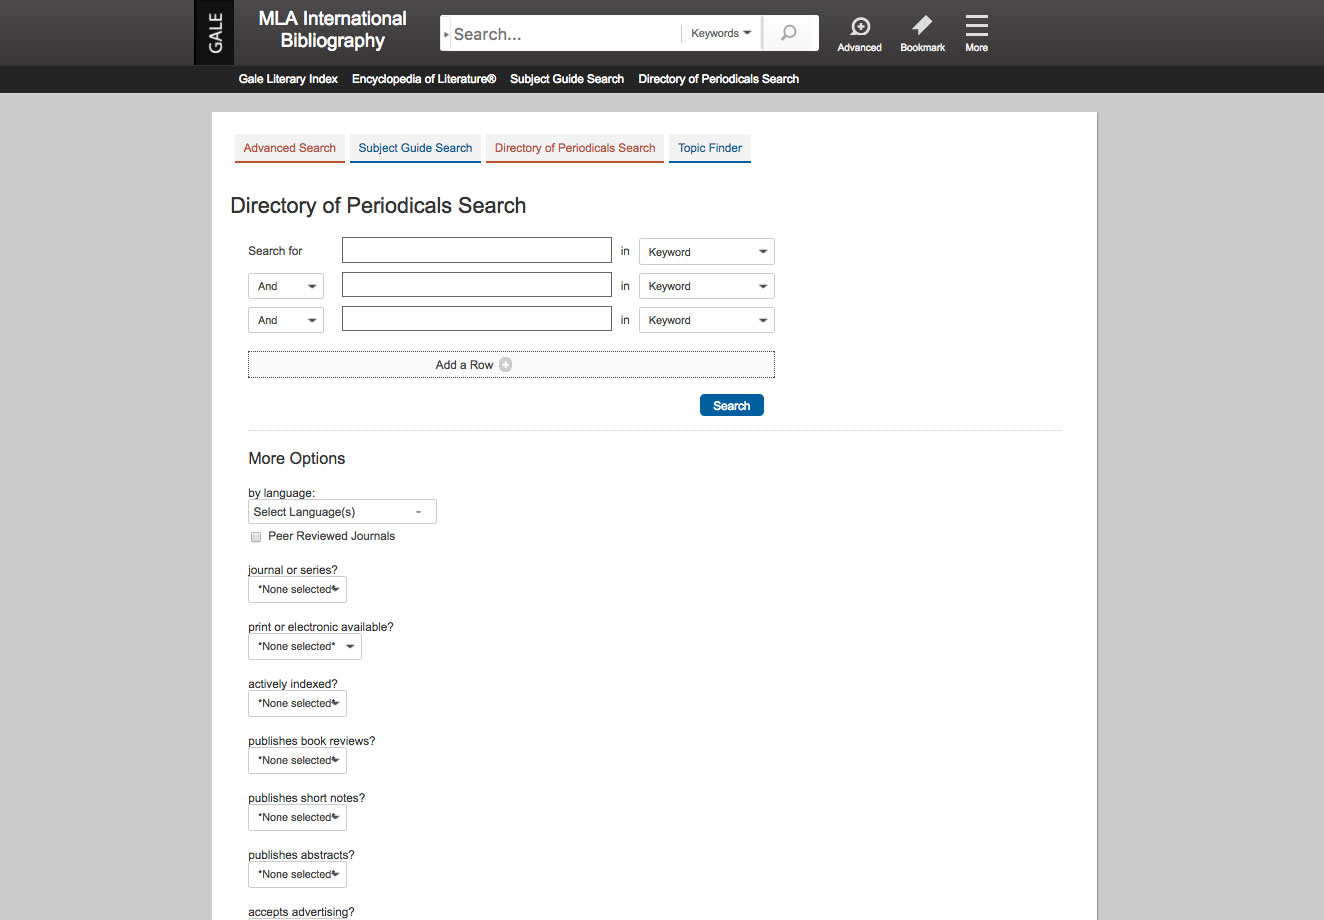 The ‘Directory of Periodicals Search’ screenshot.